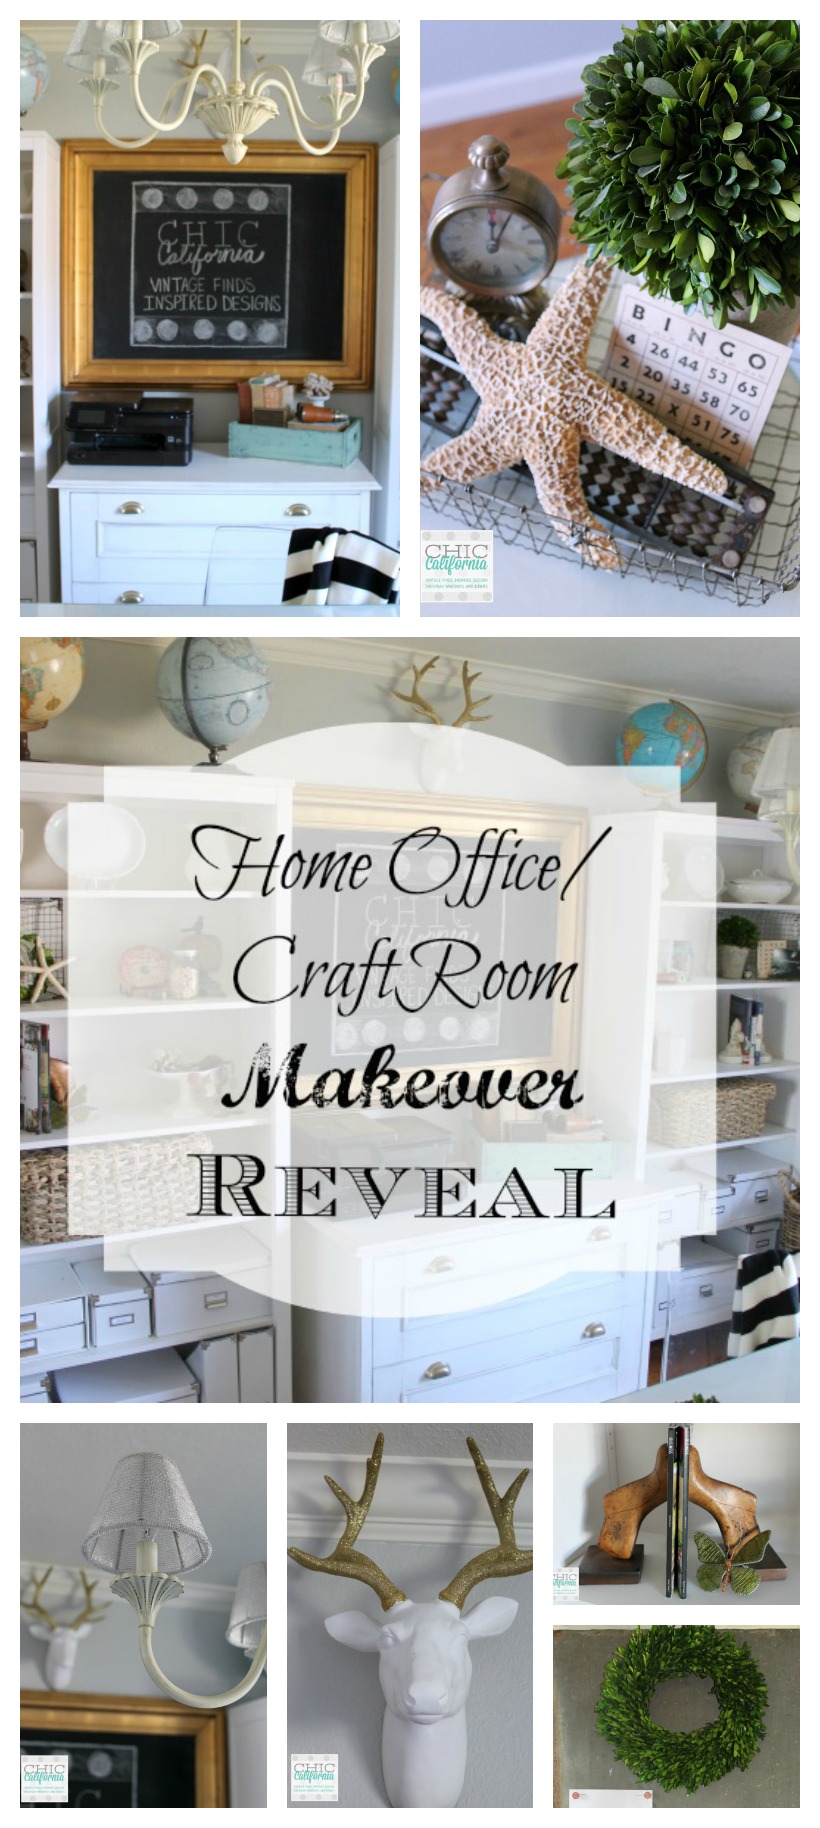 Home office Craft Room Makeover by Chic California